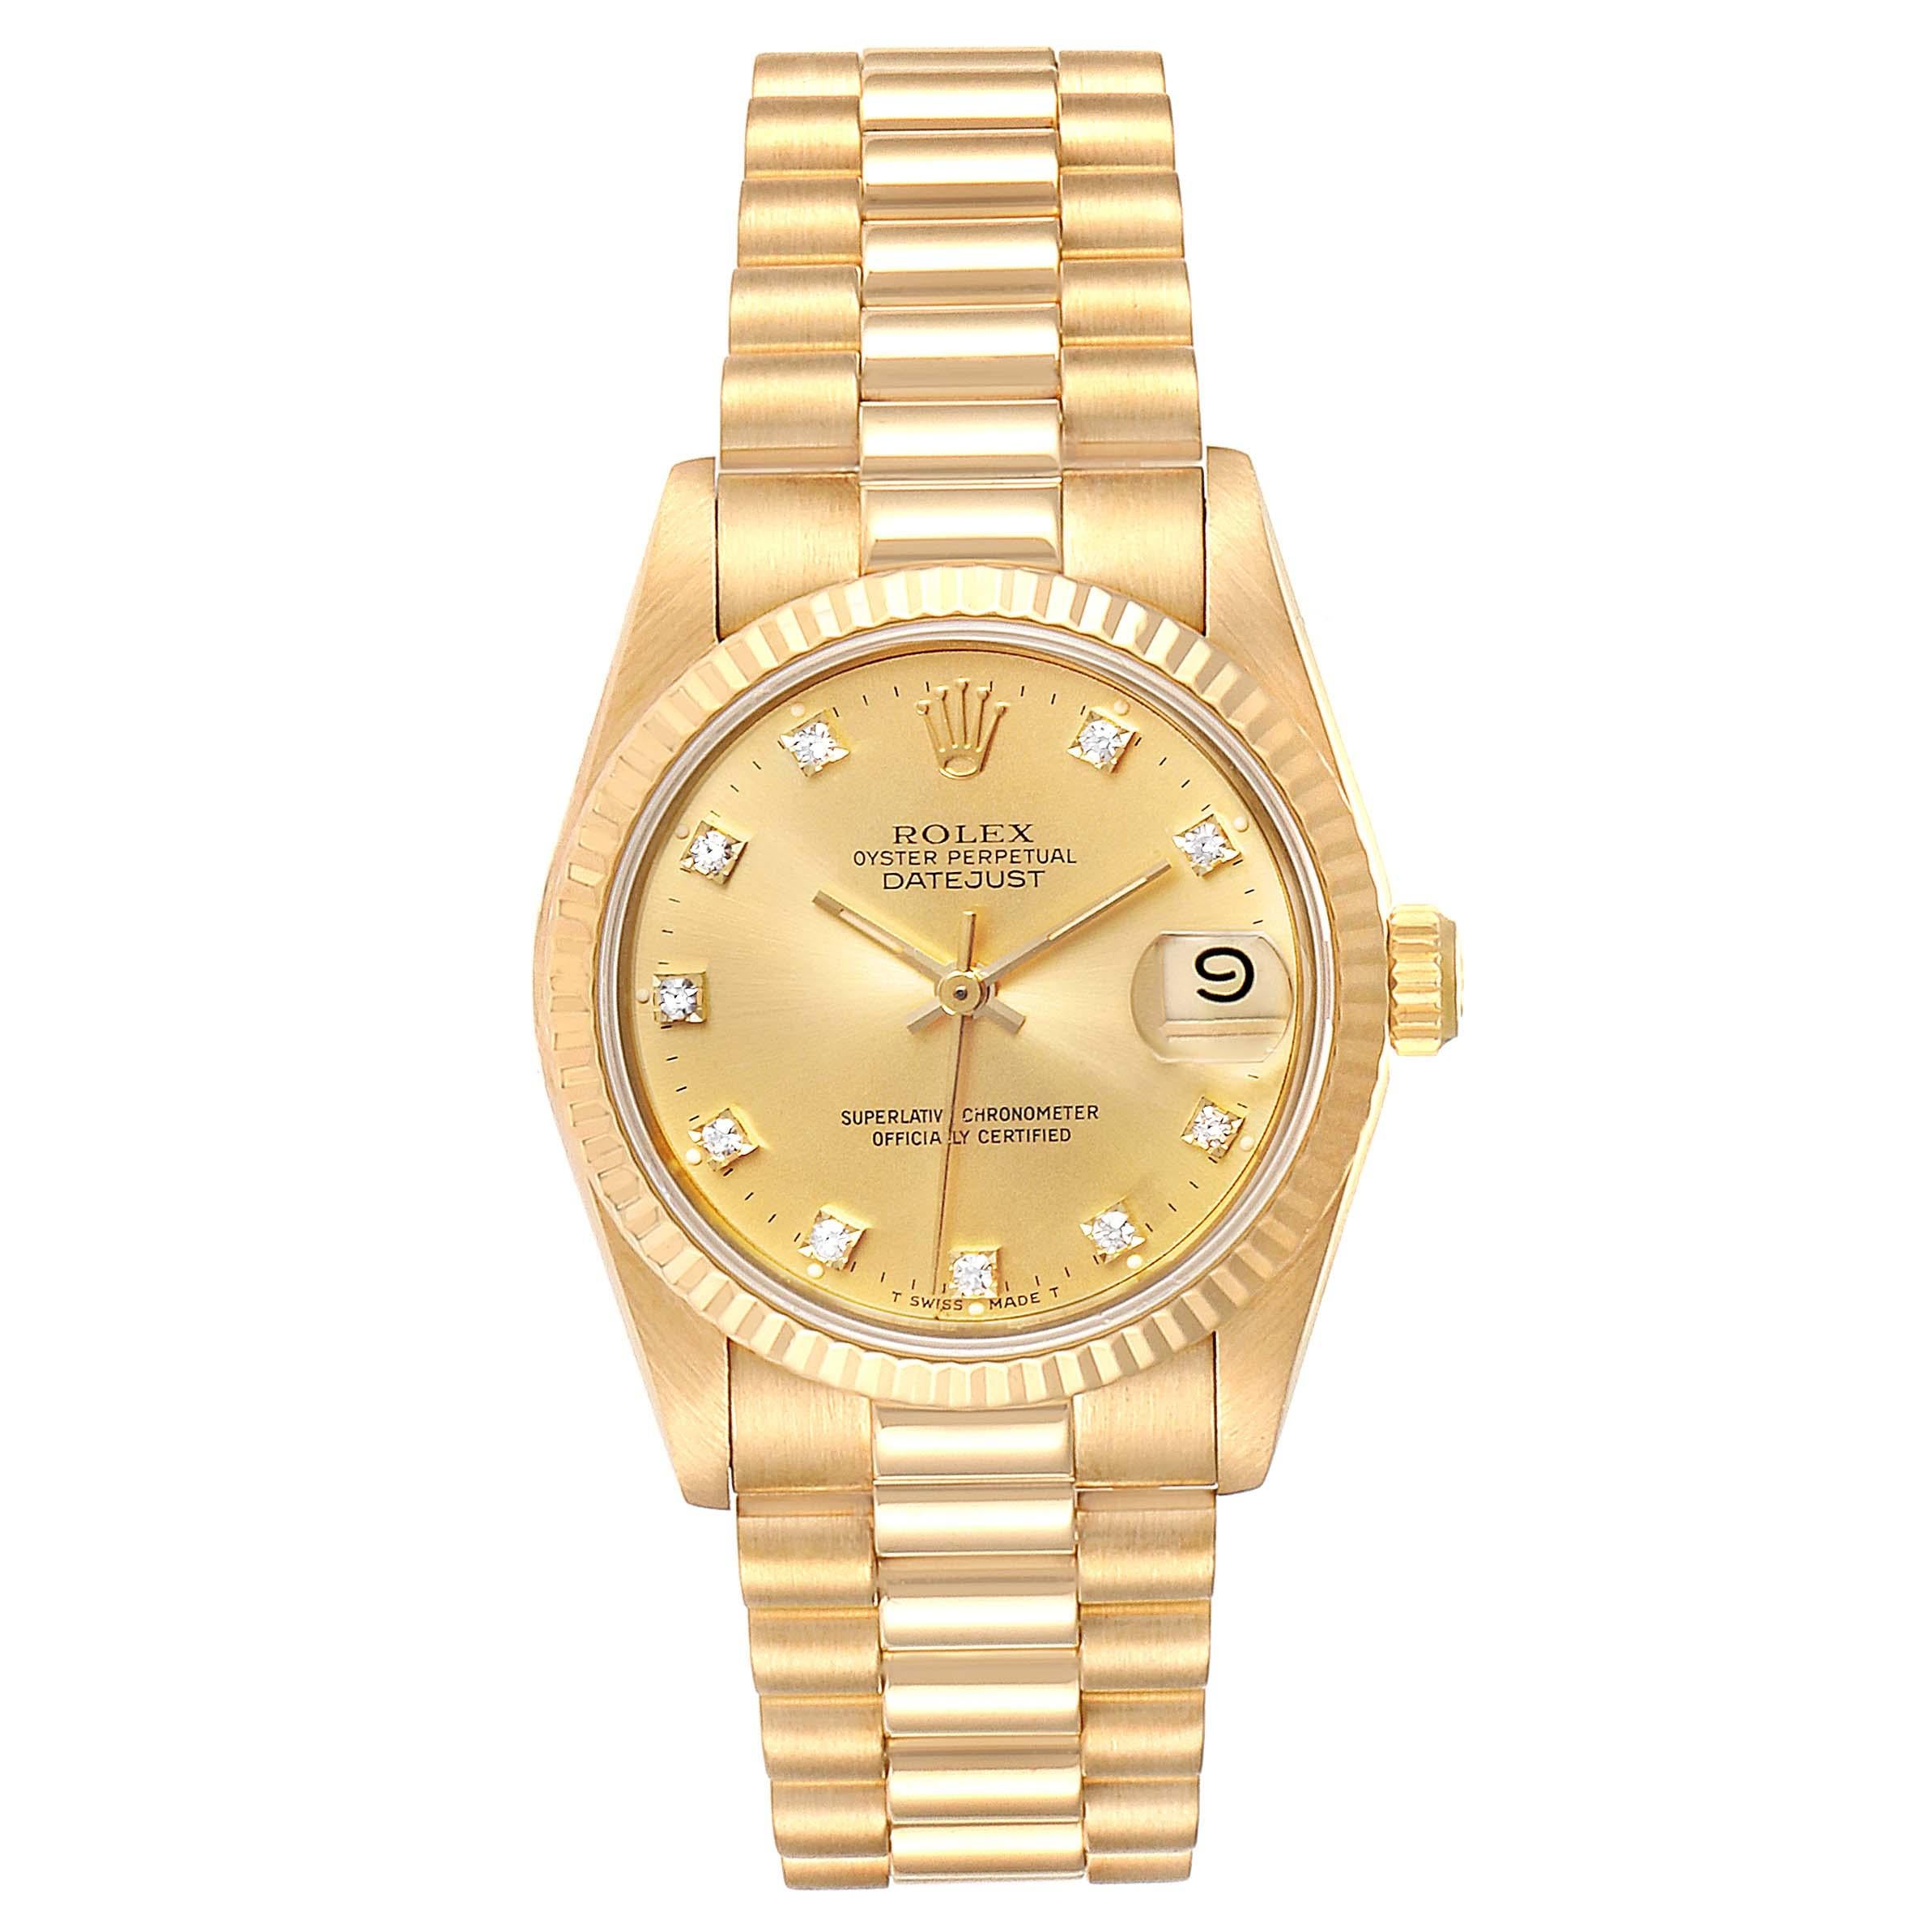 Rolex President Datejust 31 Midsize 18K Gold Diamond Watch 68278. Officially certified chronometer self-winding movement. 18k yellow gold oyster case 31.0 mm in diameter. Rolex logo on a crown. 18k yellow gold fluted bezel. Scratch resistant